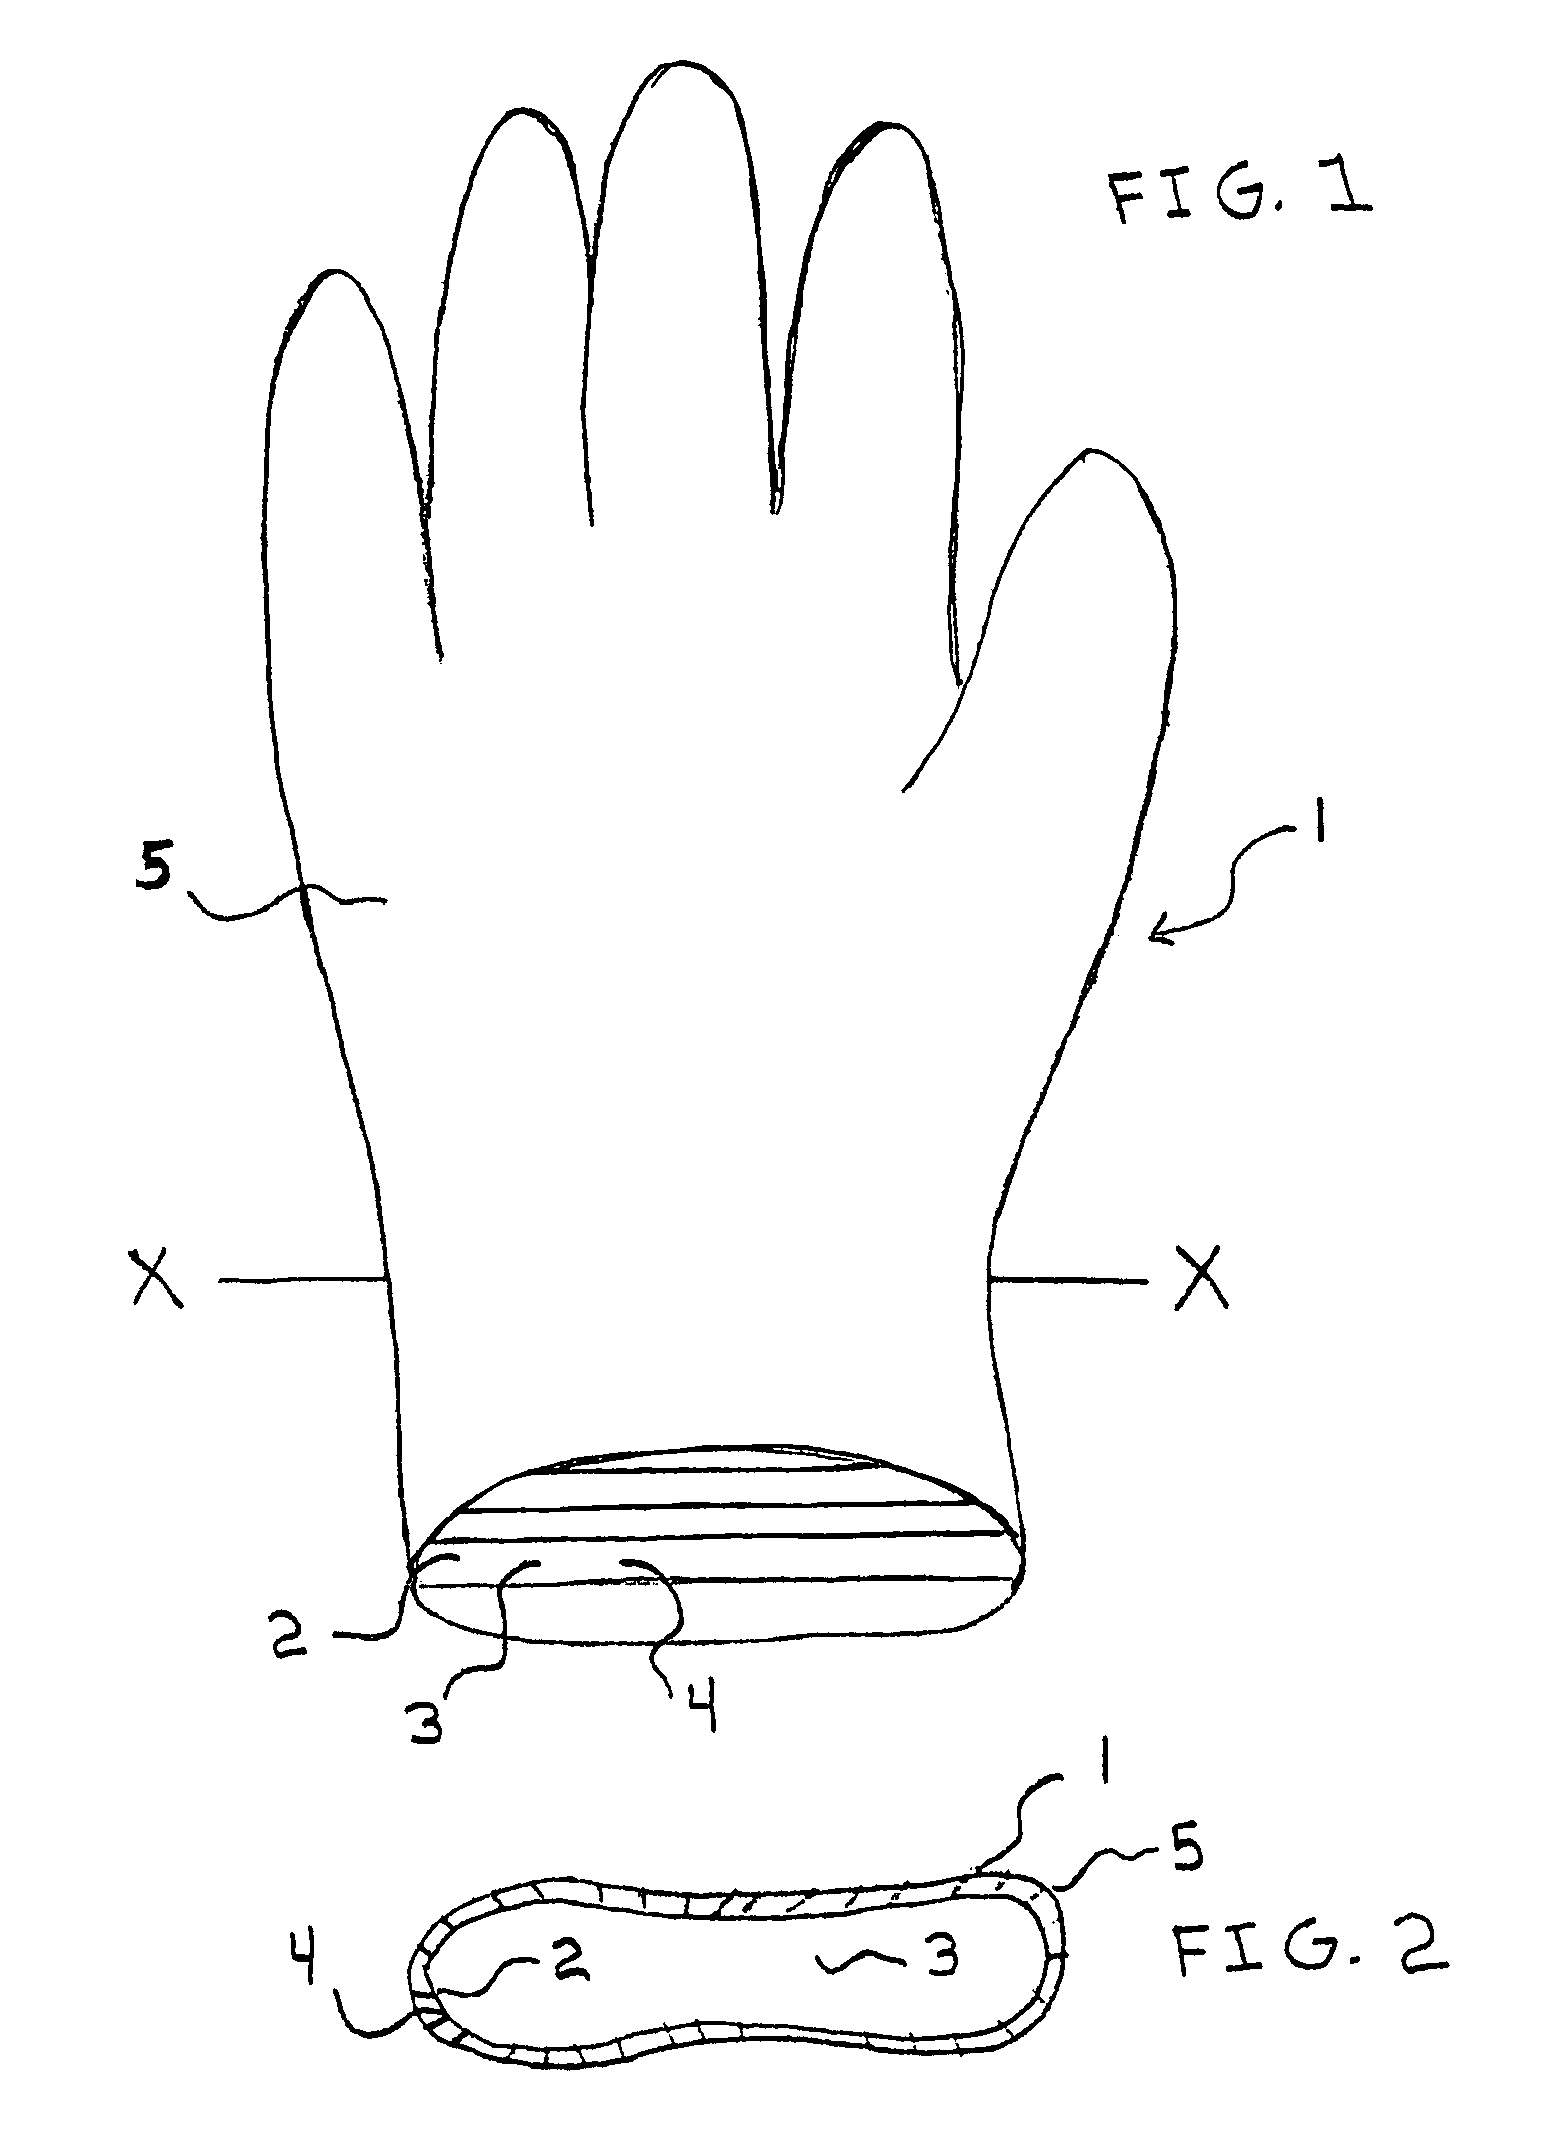 Method of manufacturing a hand health care glove